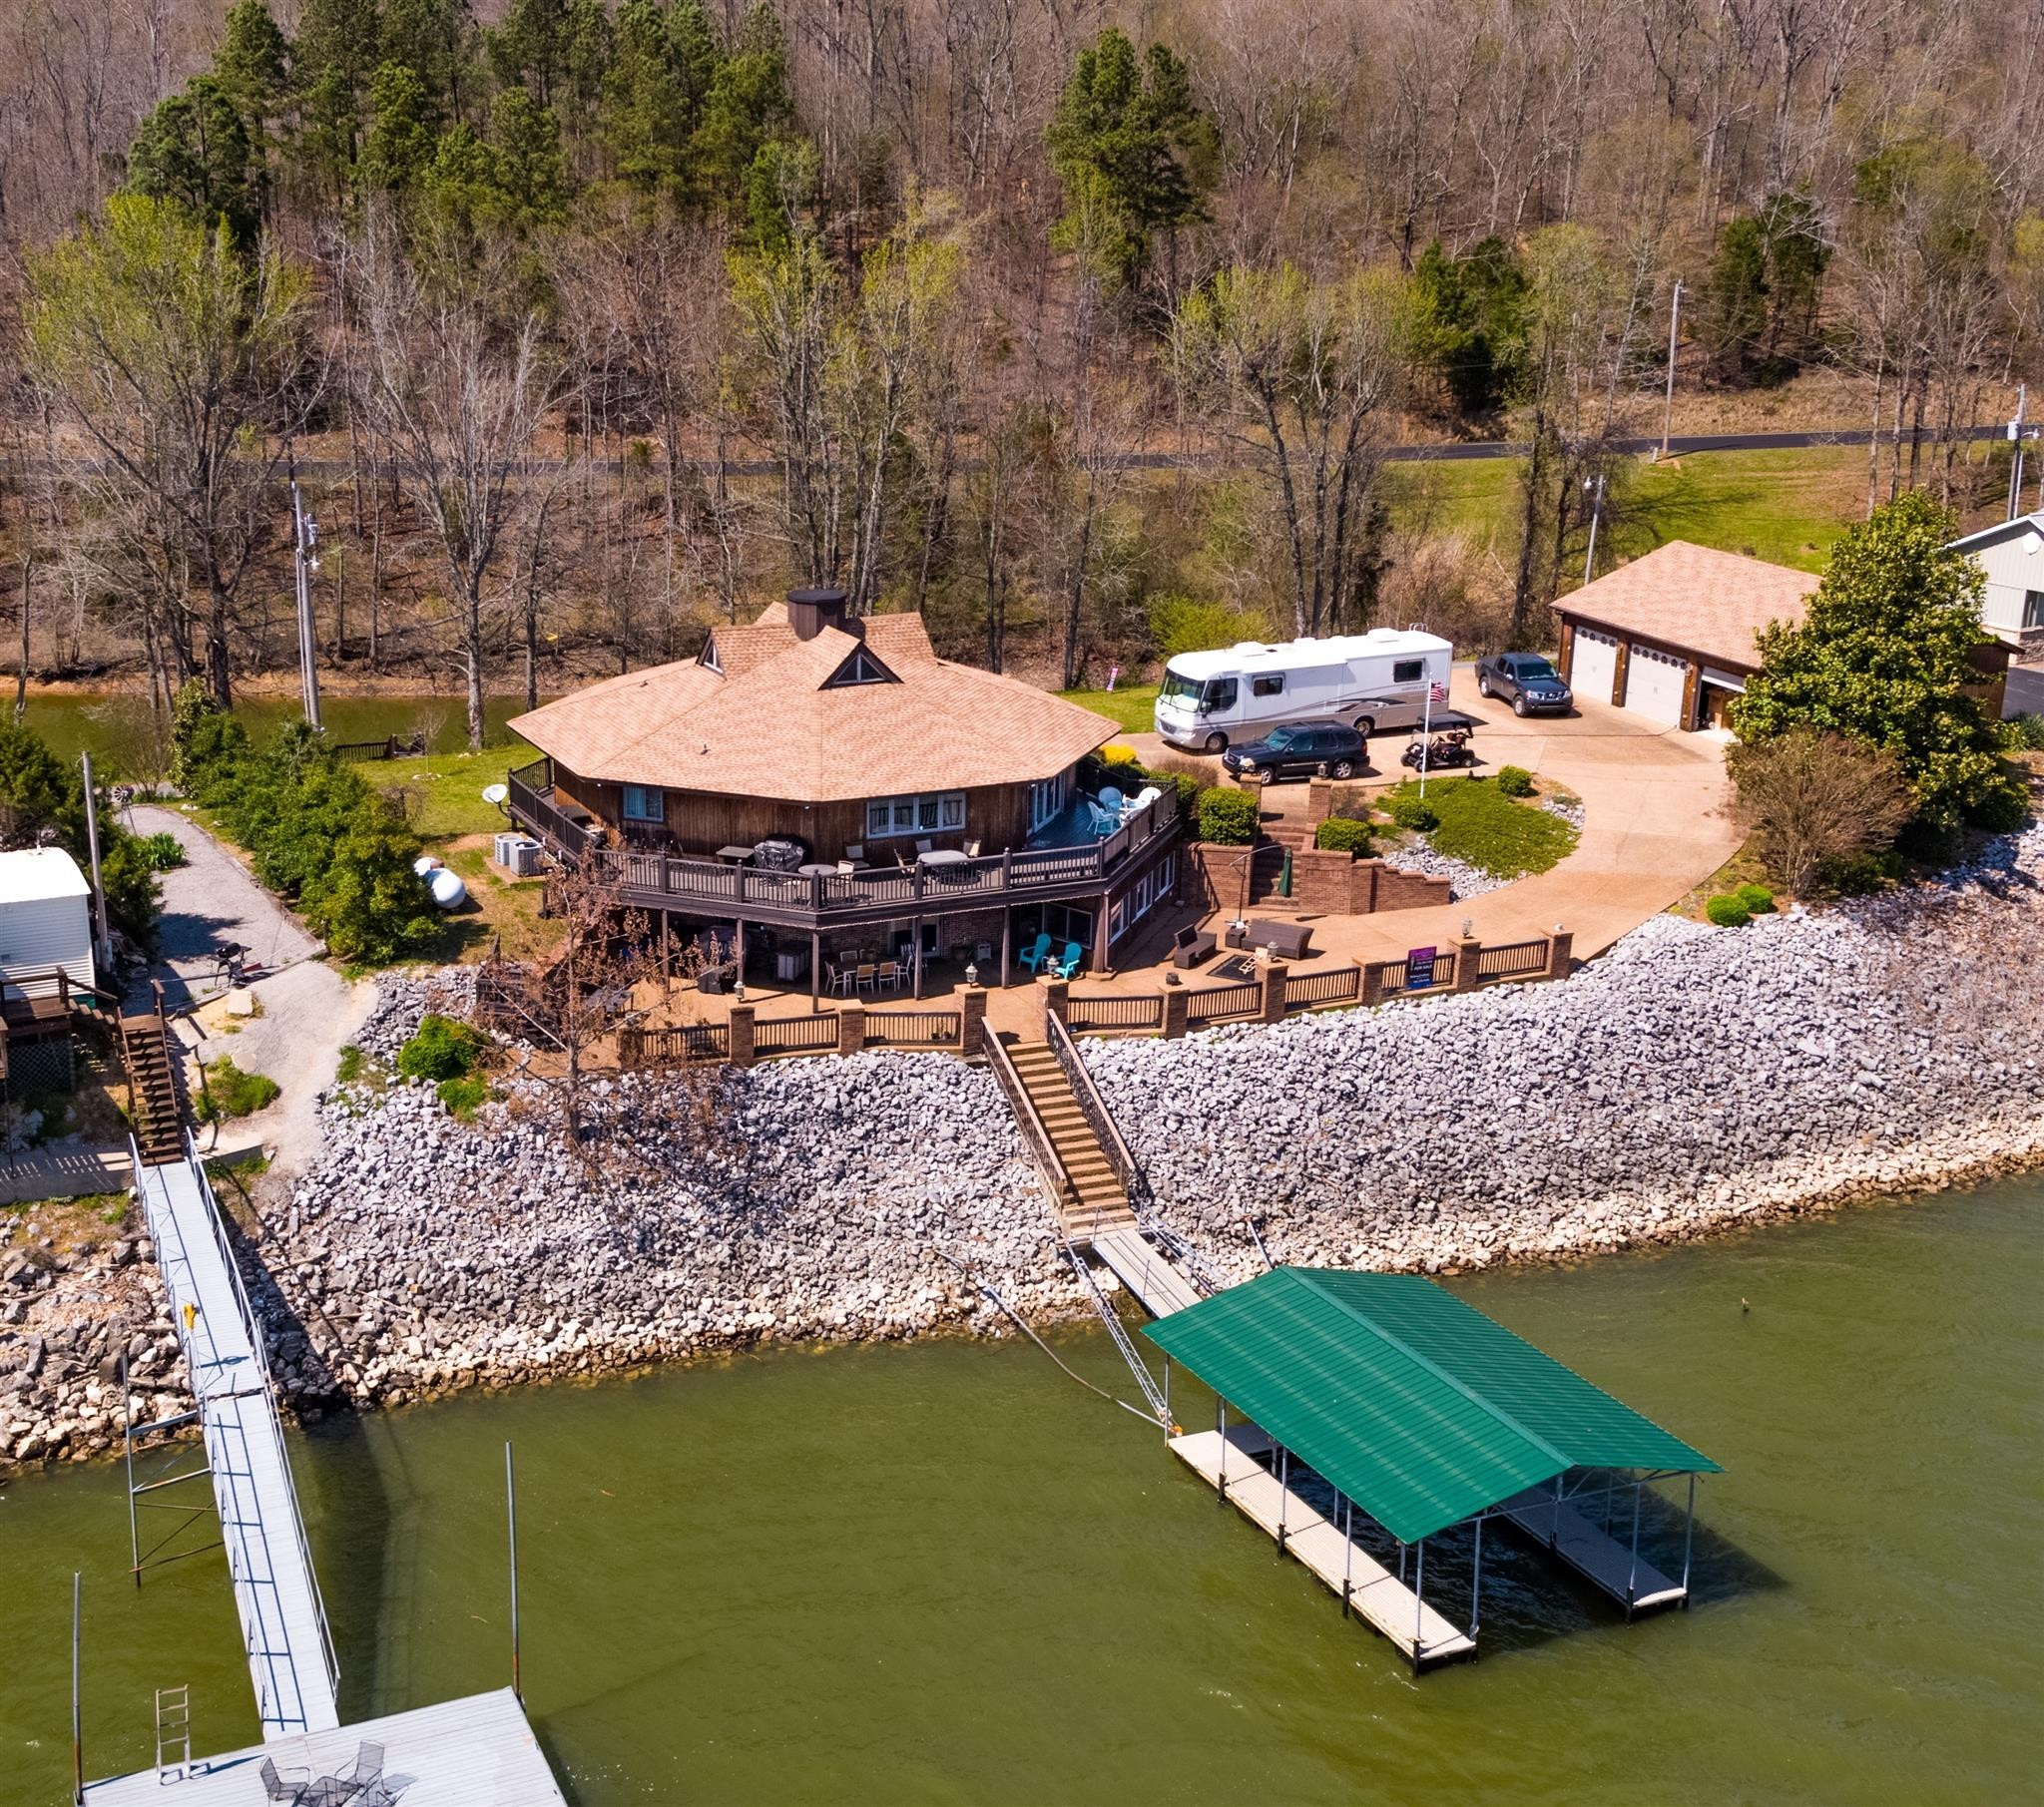 BEAUTIFUL CUSTOM HOME ON KY LAKE. DOUBLE LOT WITH 40X30 3 CAR GARAGE, COVERED BOAT DOCK, AGGREGATE DRIVE AND COVERED PATIO, WRAP-AROUND DECK AND ONLY 500 YARDS FROM 3 LANE BOAT RAMP. GATHERING ROOM WITH 2 WAY GAS FIREPLACE, FORMAL DINING ROOM PLUS BIG EAT-IN KITCHEN WITH GRANITE, UPDATED STAINLESS STEEL APPLIANCES AND DOUBLE OVENS. HUGE MASTER SUITE. MEDIA ROOM, BILLIARD ROOM, OFICE AND SEPARATE DEN. CLICK ON PHOTO TO VIEW DETAILED LIST OF FEATURES.